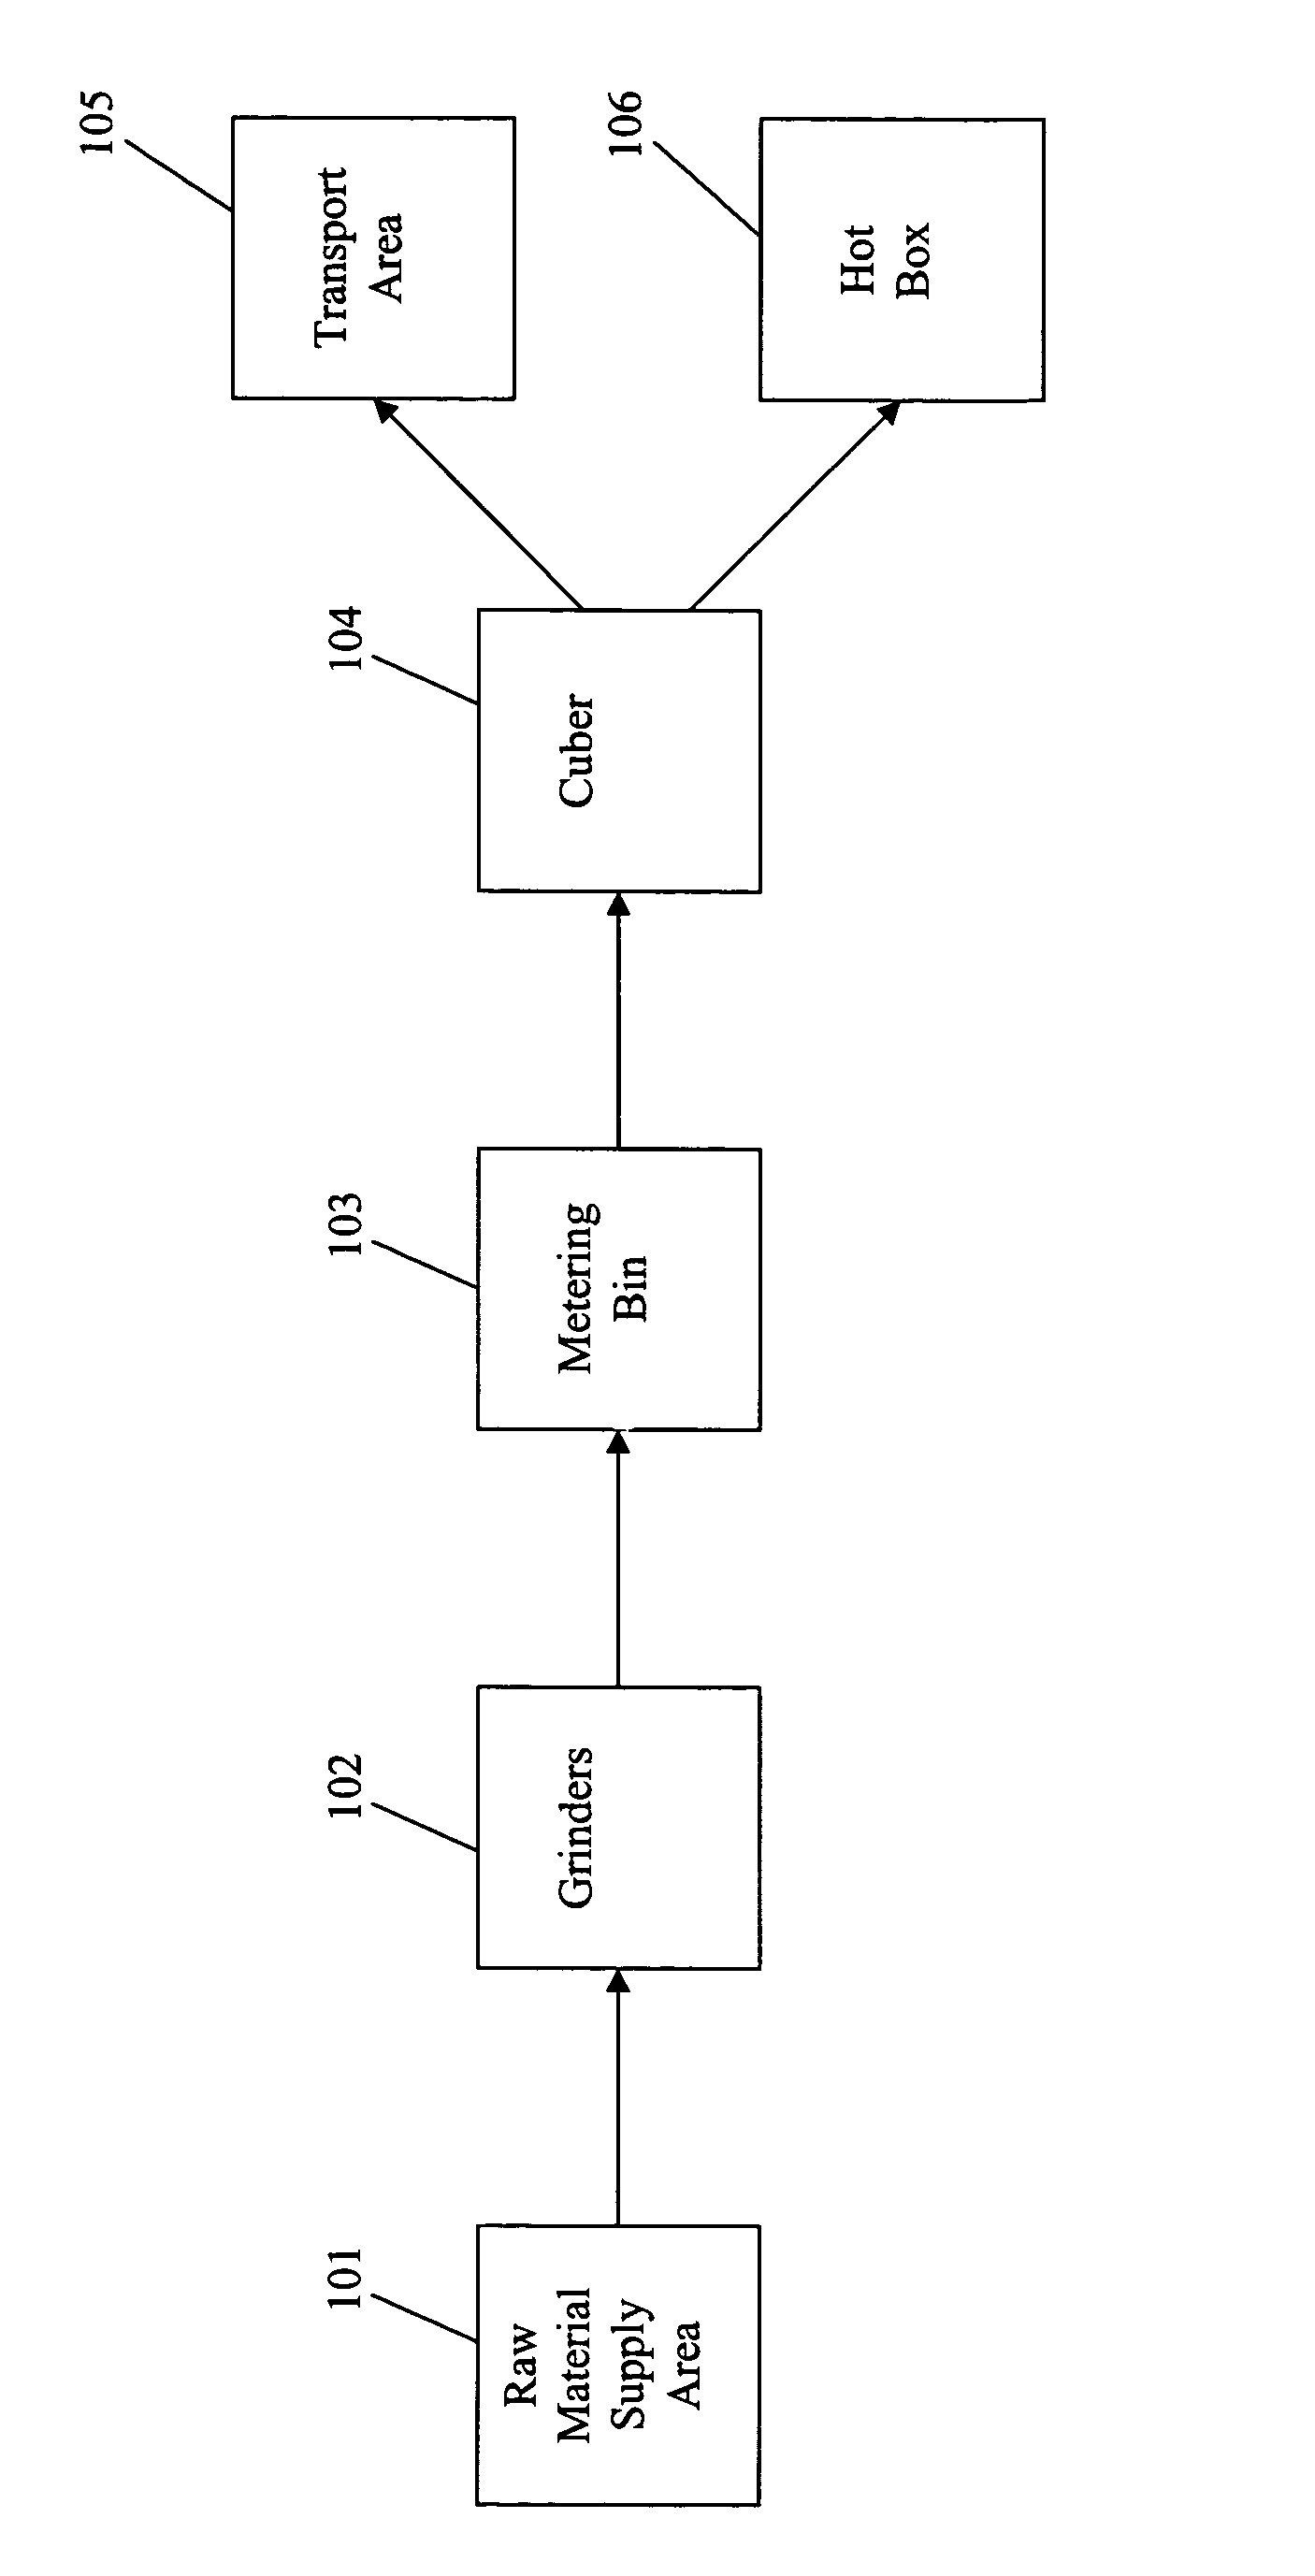 Method for manufacturing combustible products